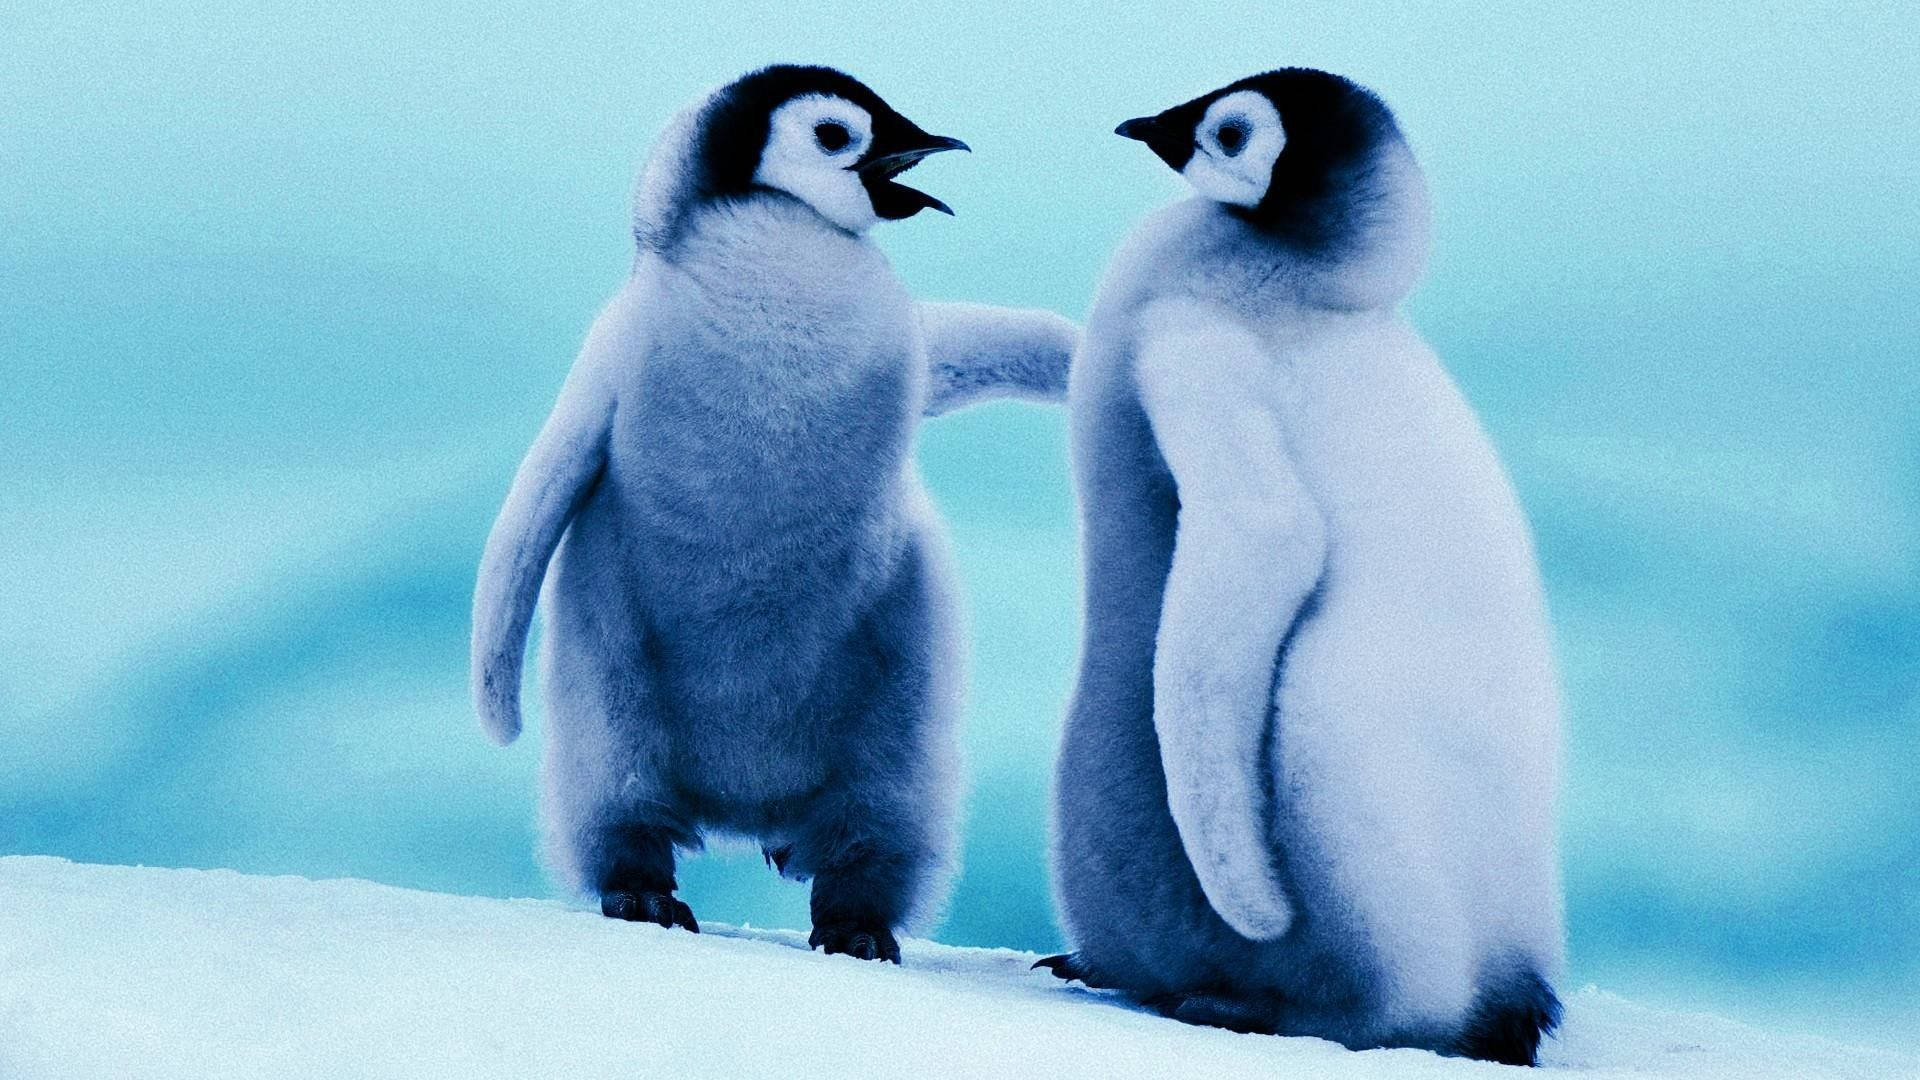 Two Baby Penguins Background